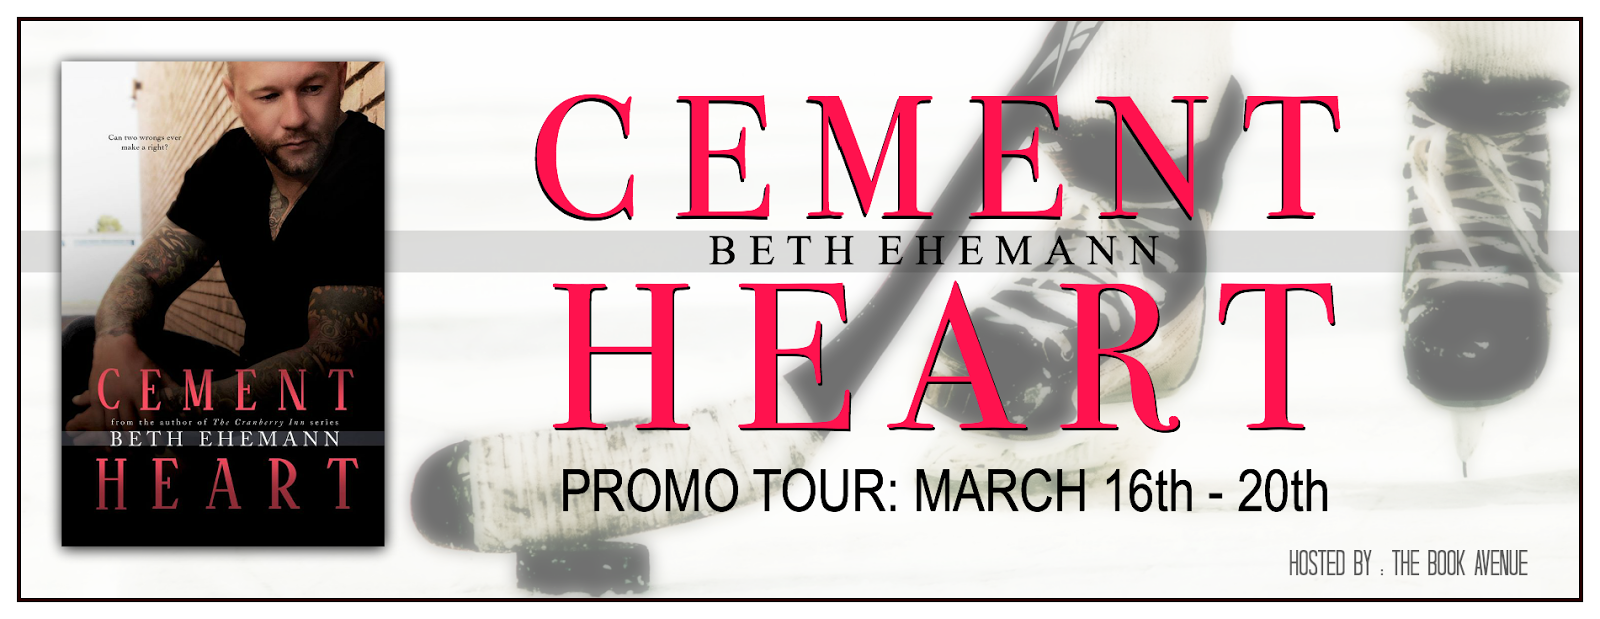 Cement Heart is LIVE! Read the Excerpt, My Review and Enter the Giveaway